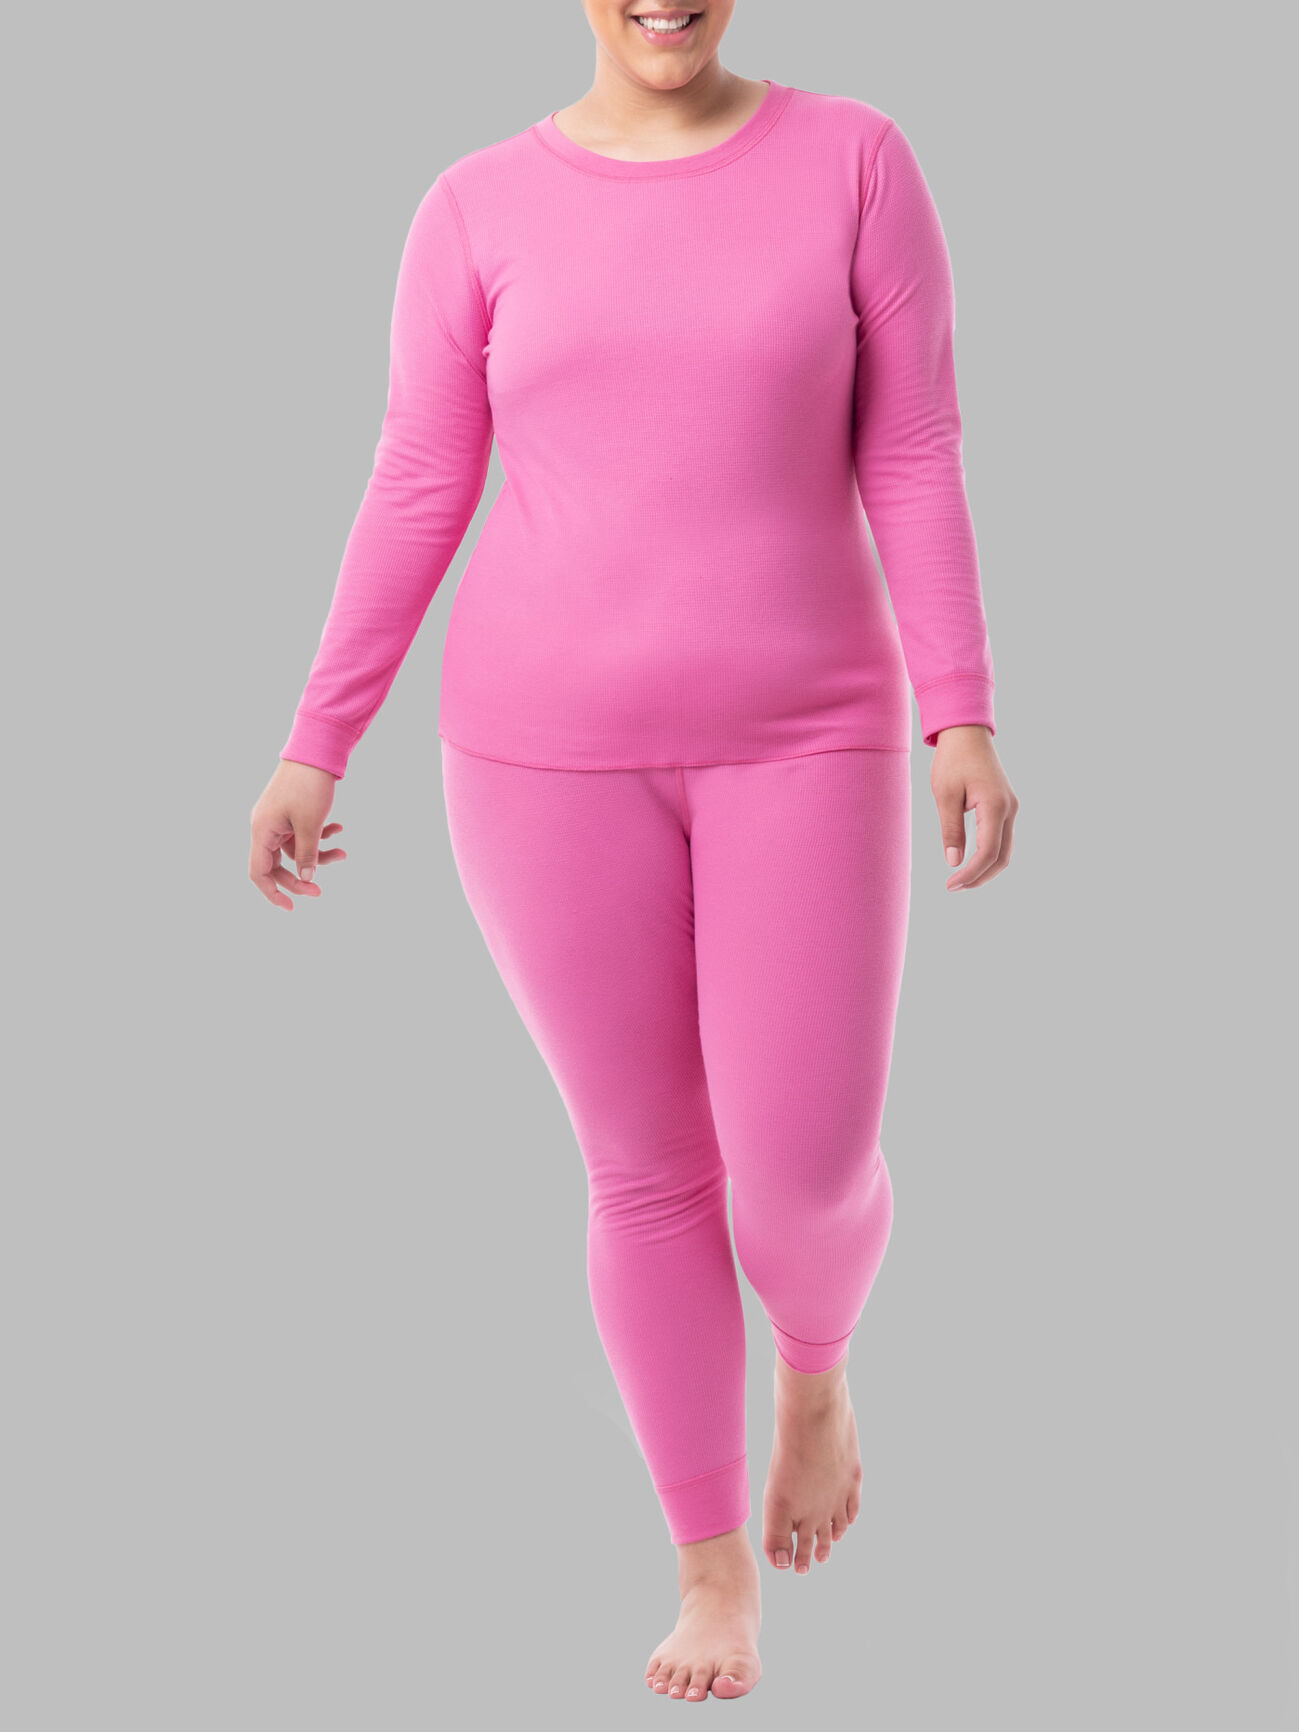 Women's Thermal Underwear Winter Fleece Thermo Clothes Intimate